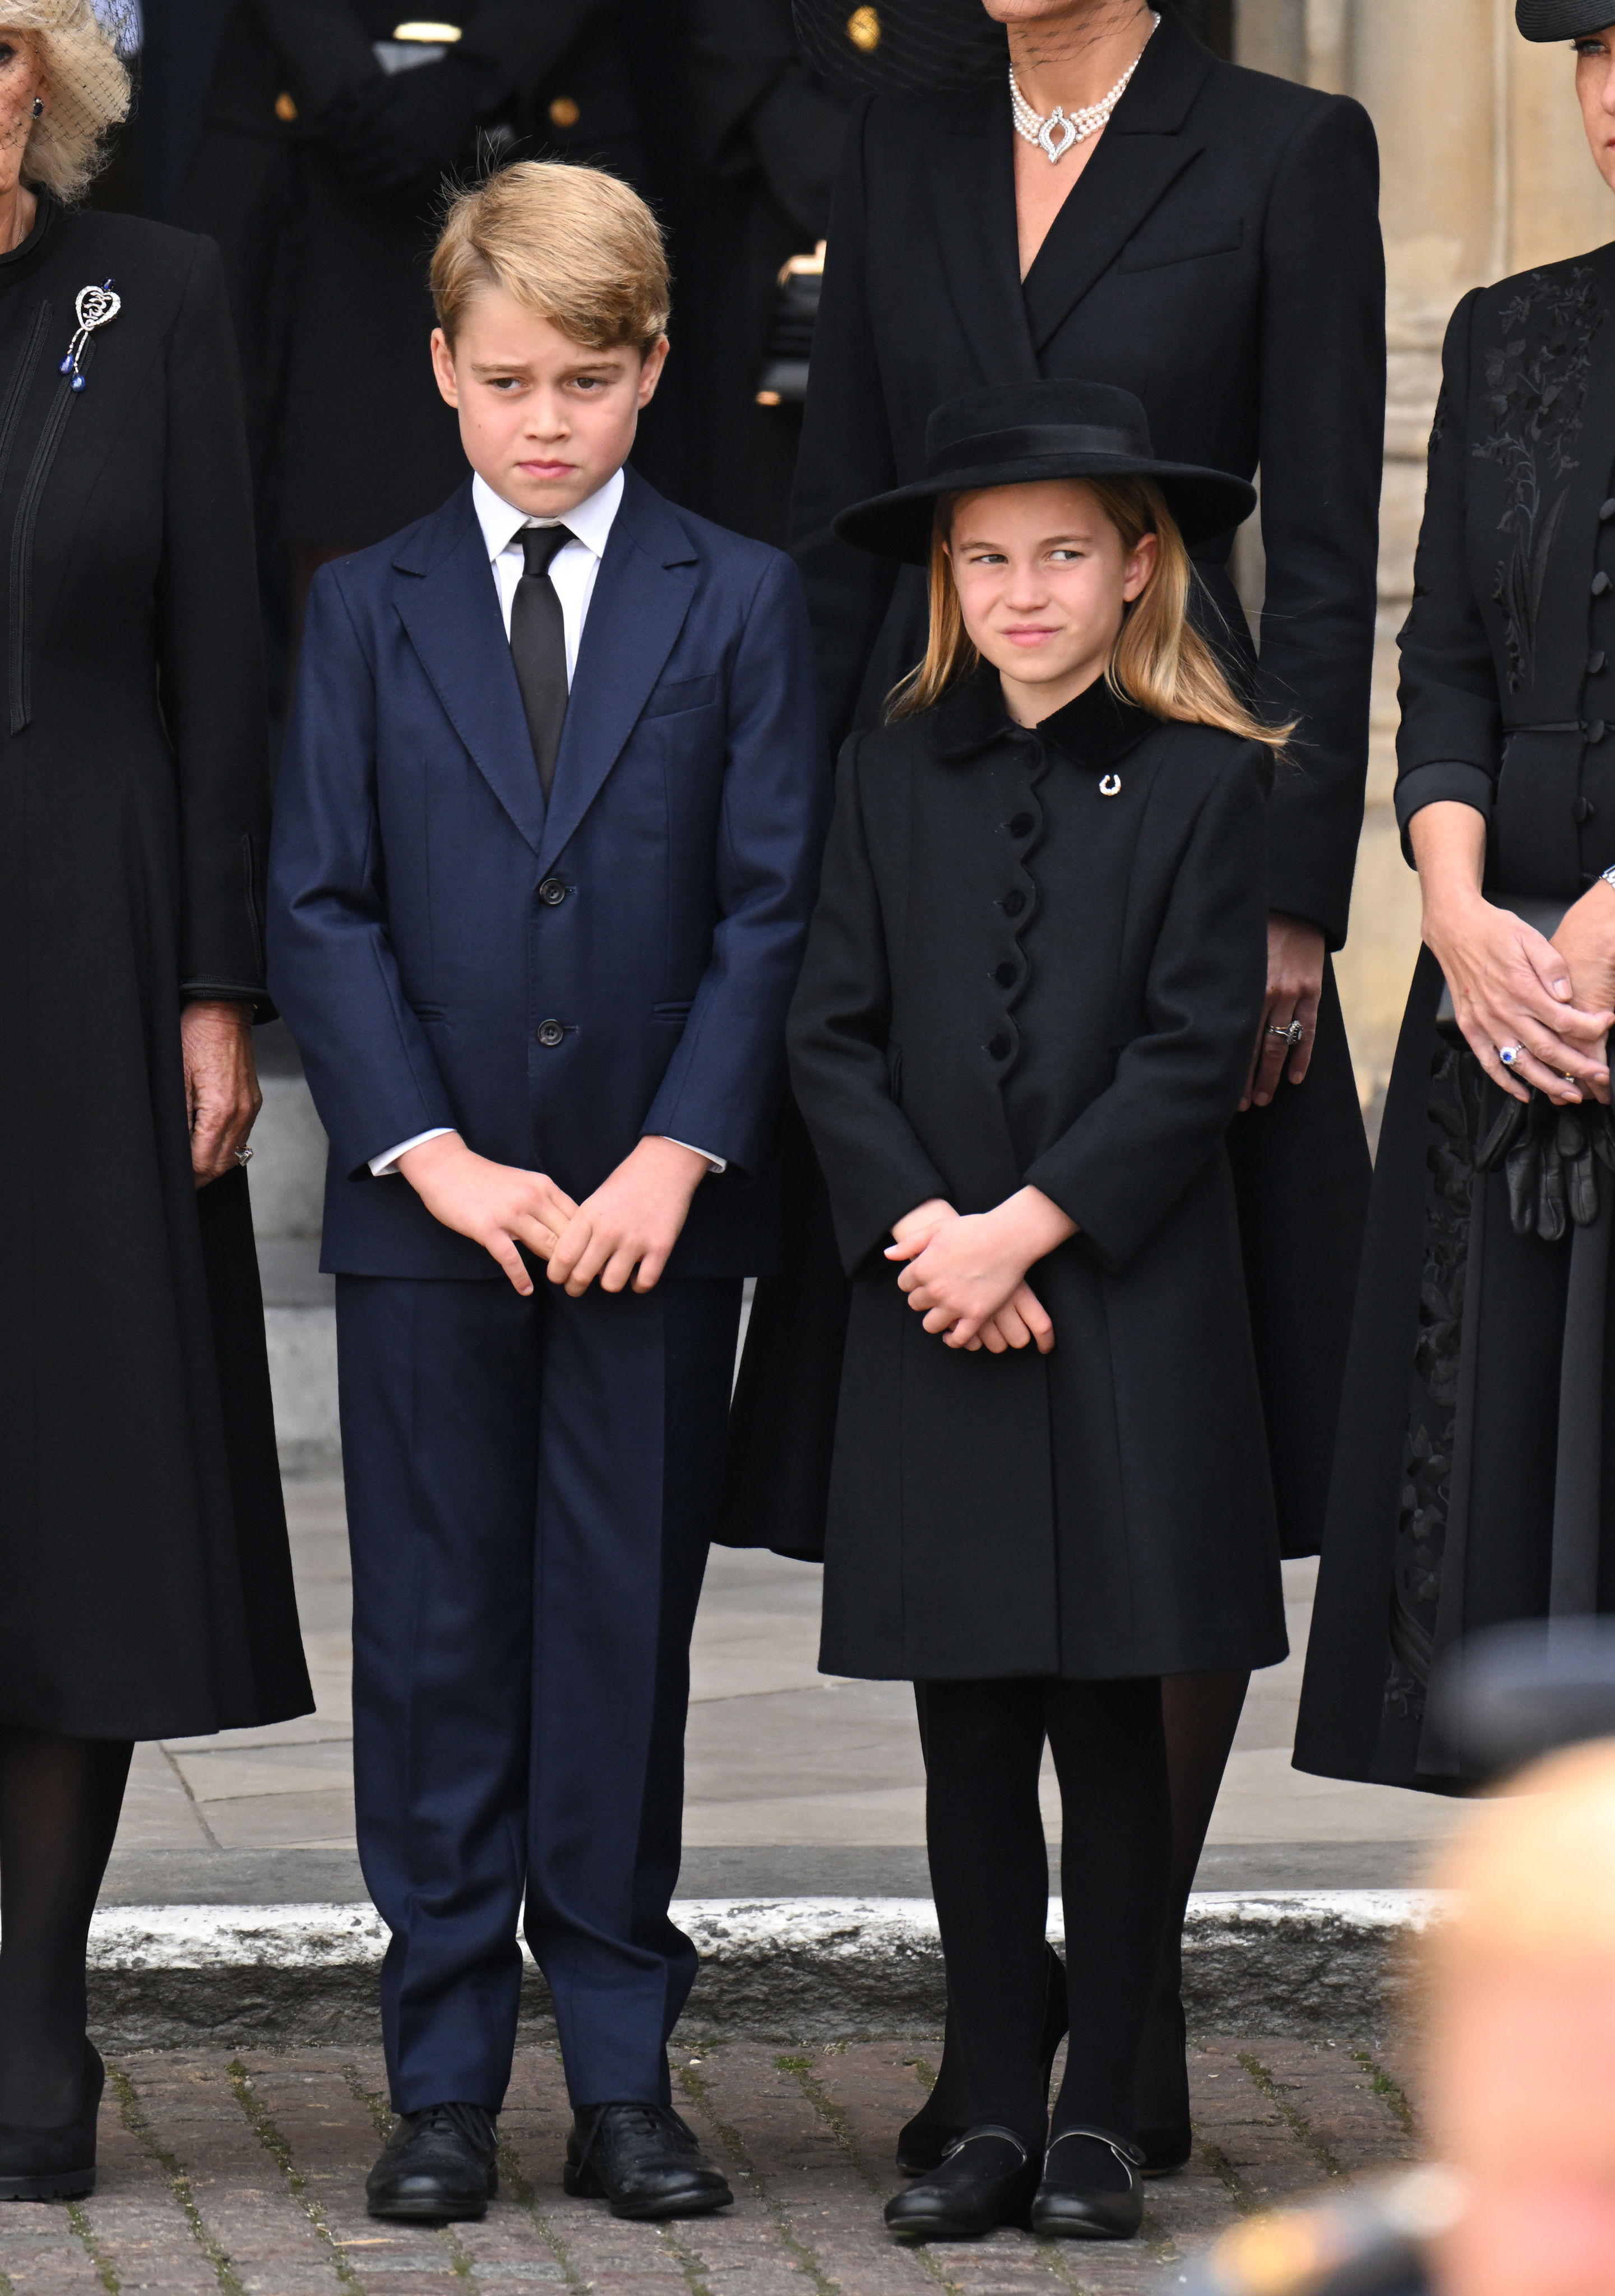 <p>Prince George of Wales and Princess Charlotte of Wales stood in front of Westminster Abbey in London during <a href="https://www.wonderwall.com/celebrity/royals/best-photos-from-queen-elizabeth-ii-funeral-king-charles-princes-william-prince-harry-george-charlotte-kate-meghan652347.gallery">the state funeral </a>of great-grandmother Queen Elizabeth II on Sept. 19, 2022.</p>